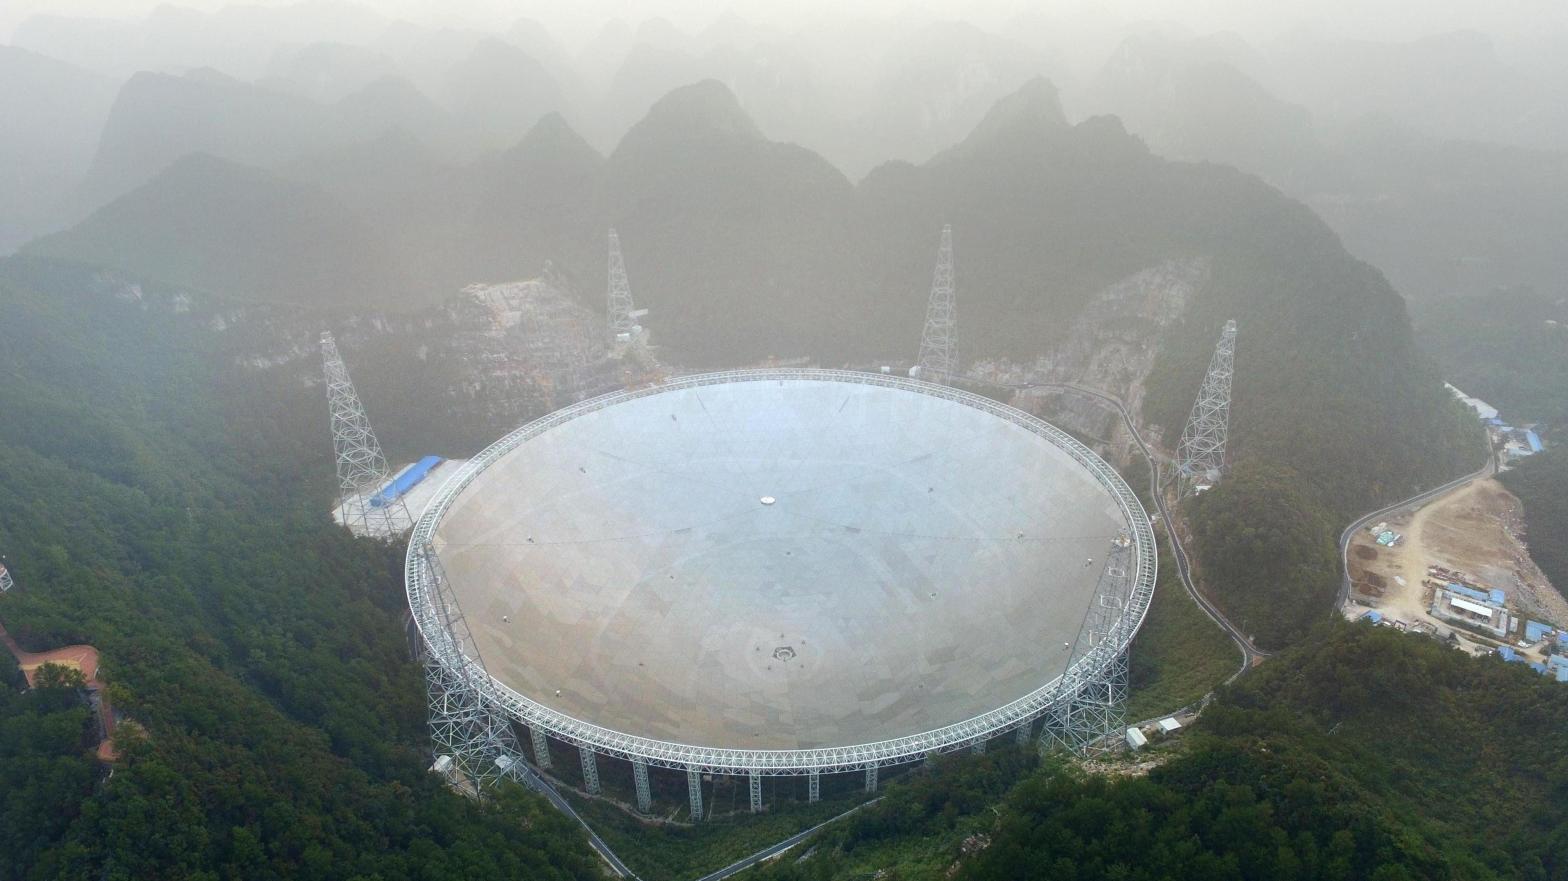 The apparent signals were captured by the Sky Eye telescope in China, which is designed to search for extraterrestrial radio transmissions.  (Image: STR/AFP, Getty Images)